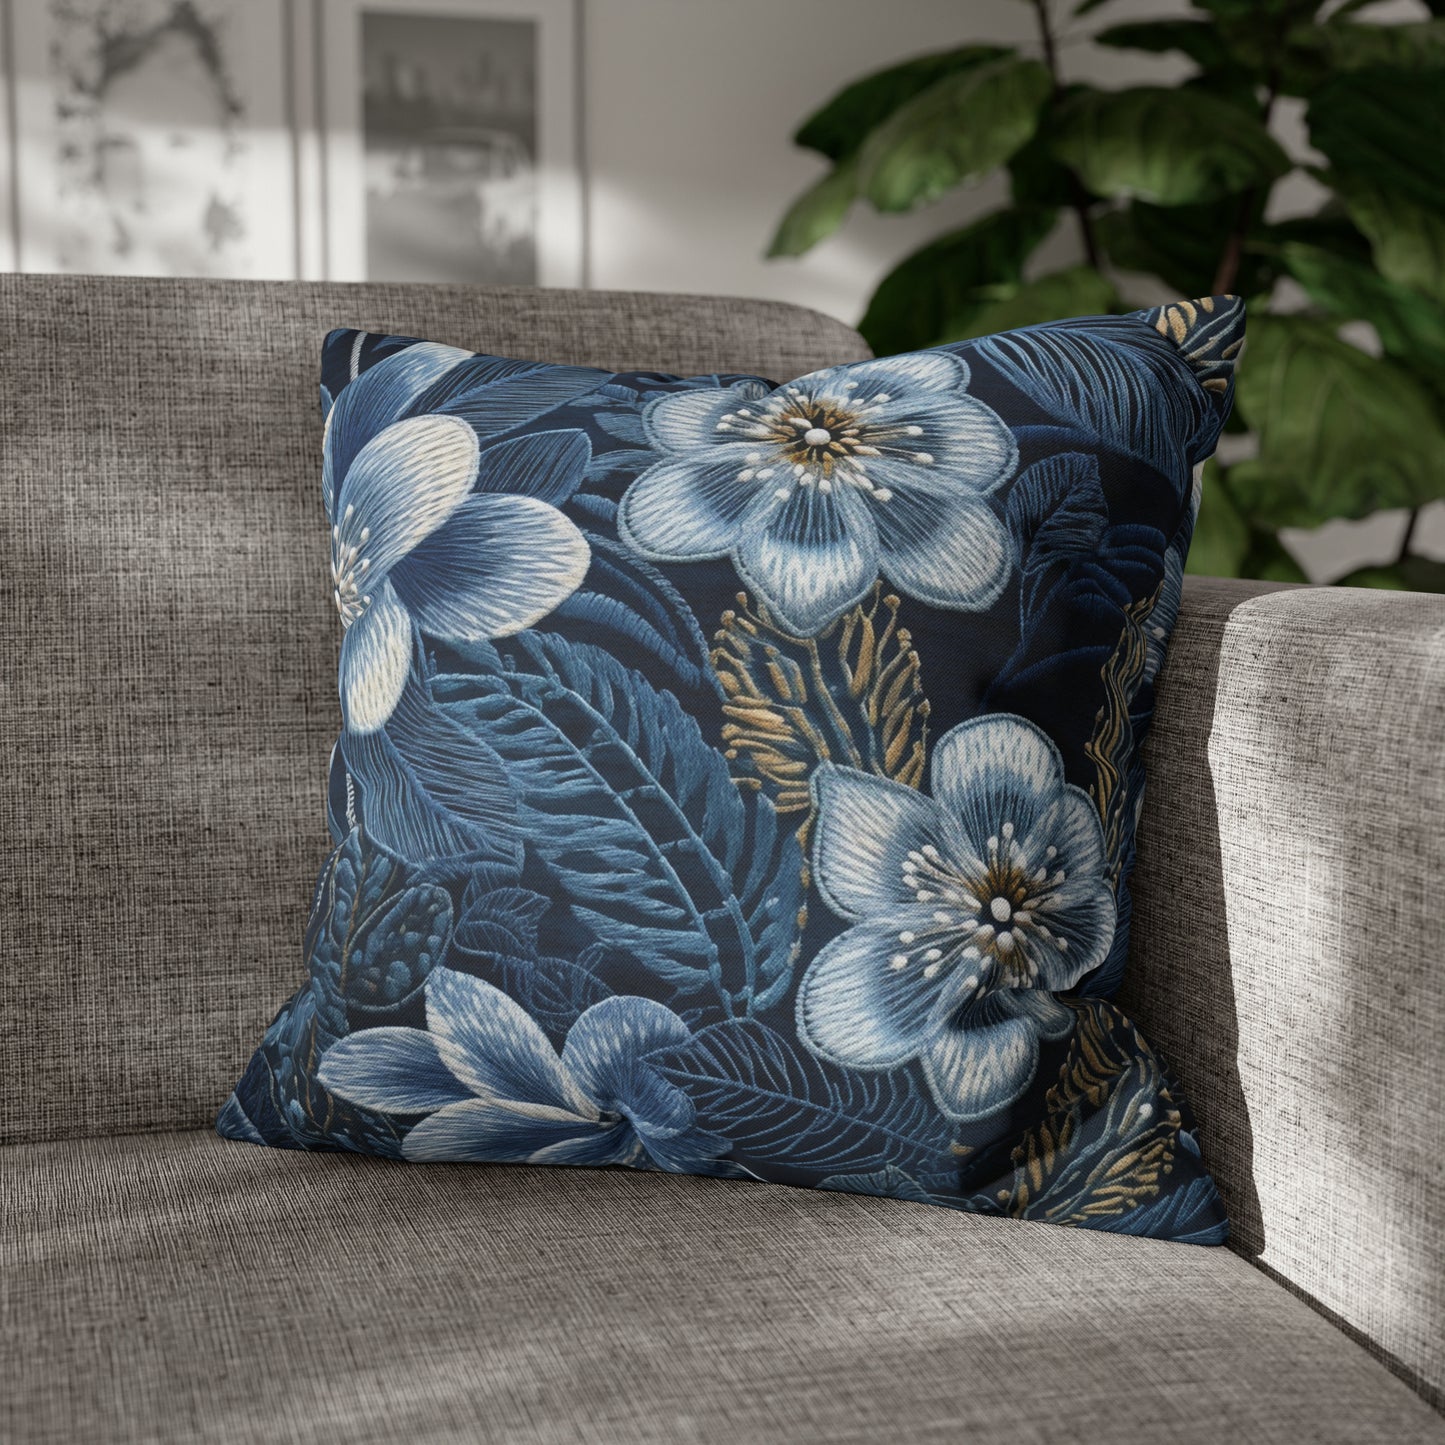 Flower Blossom Embroidery Floral on Denim Style - Spun Polyester Square Pillow Case